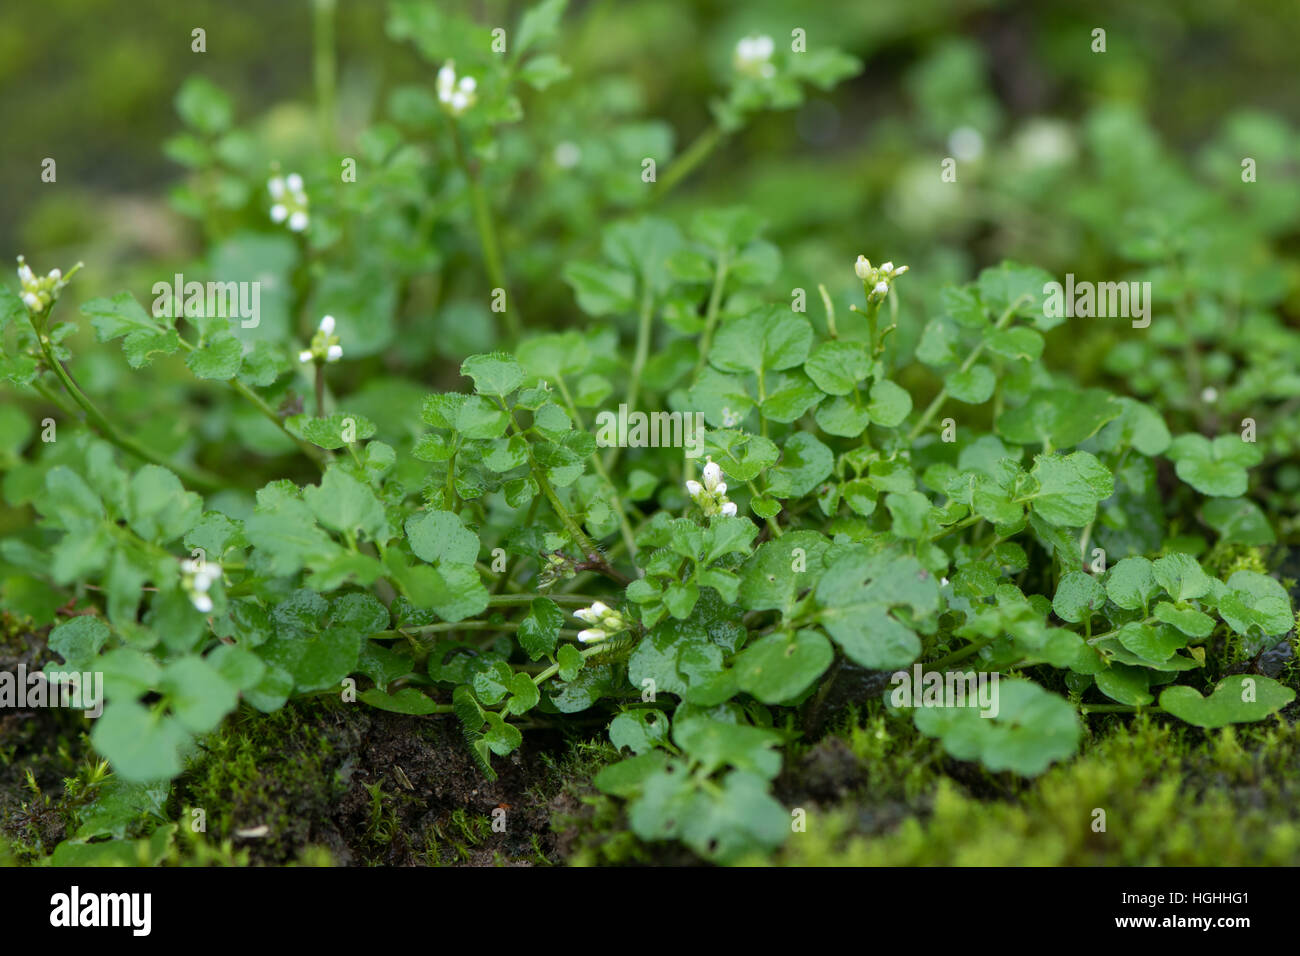 Hairy bittercress (Cardamine hirsuta) plant. Common weed and bitter edible herb in the mustard family (Brassicaceae), Stock Photo